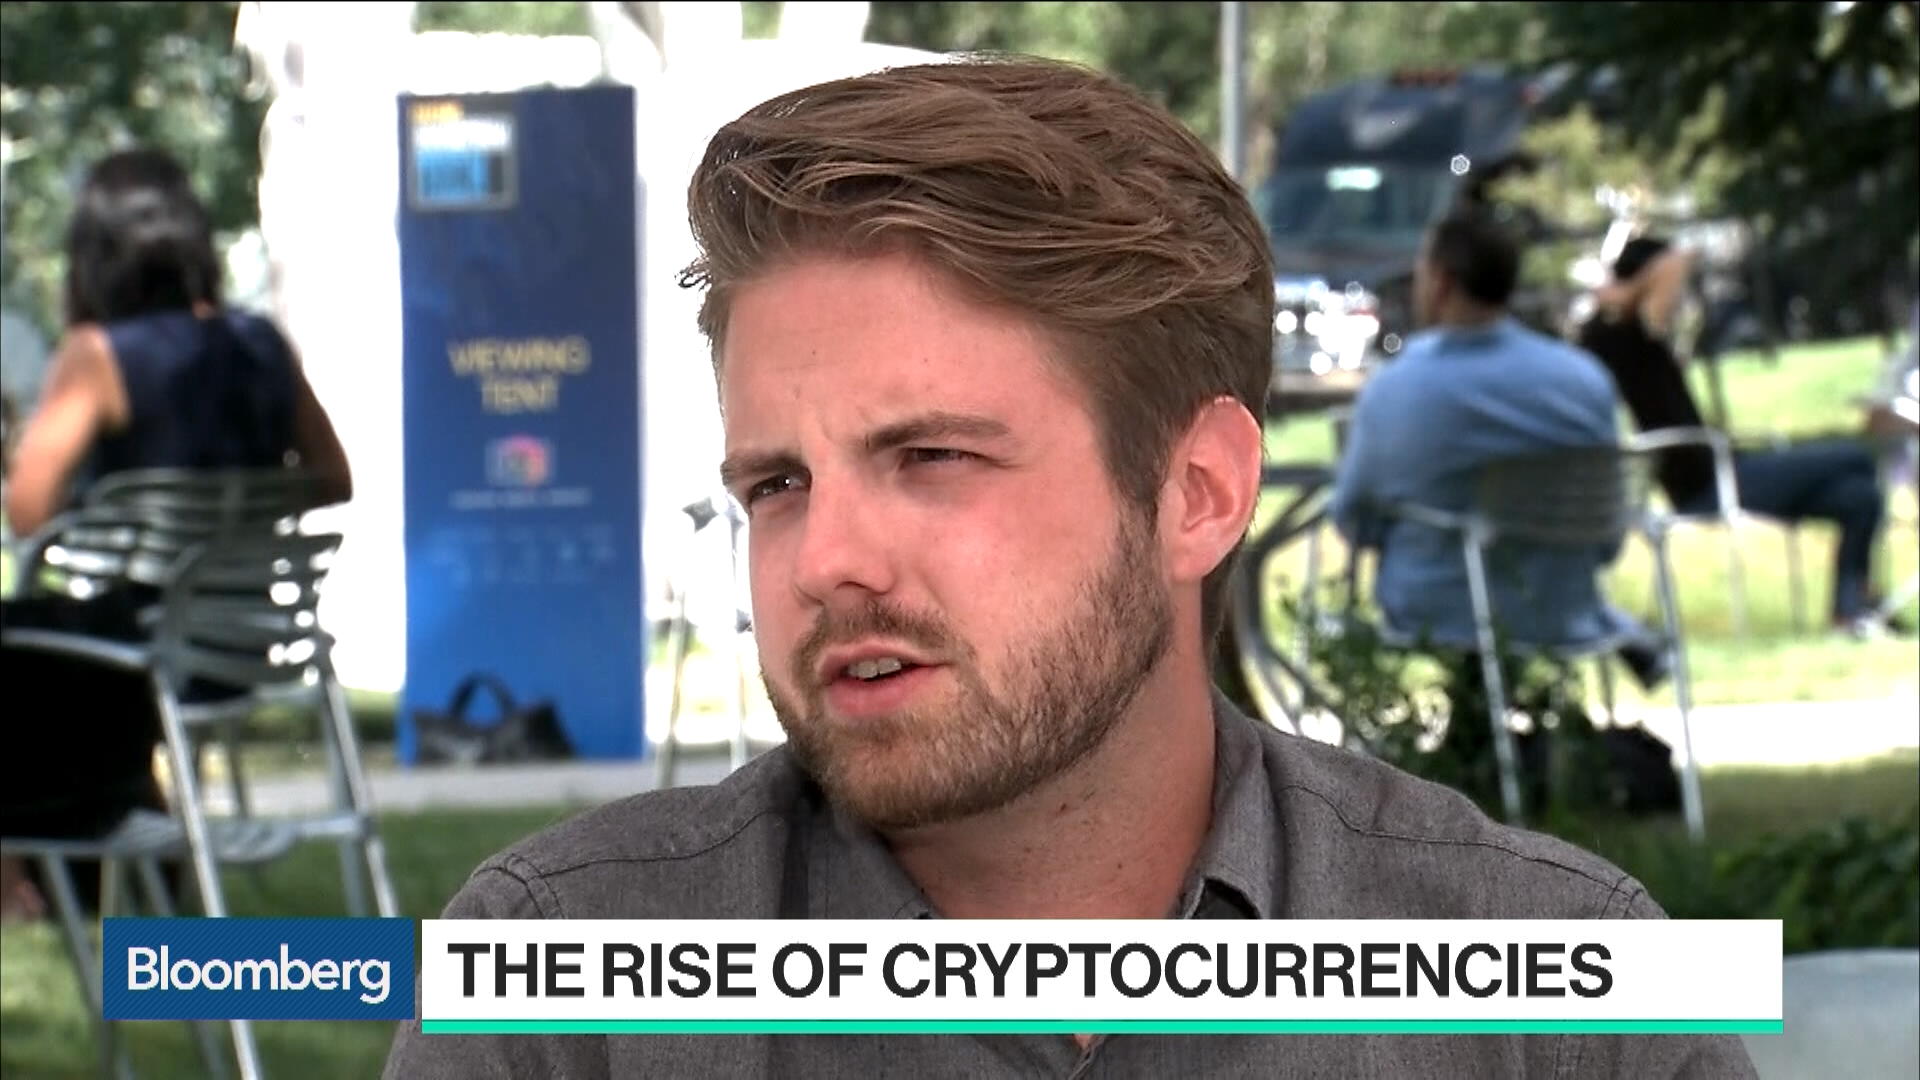 Blockchain CEO says crypto coin market will be huge